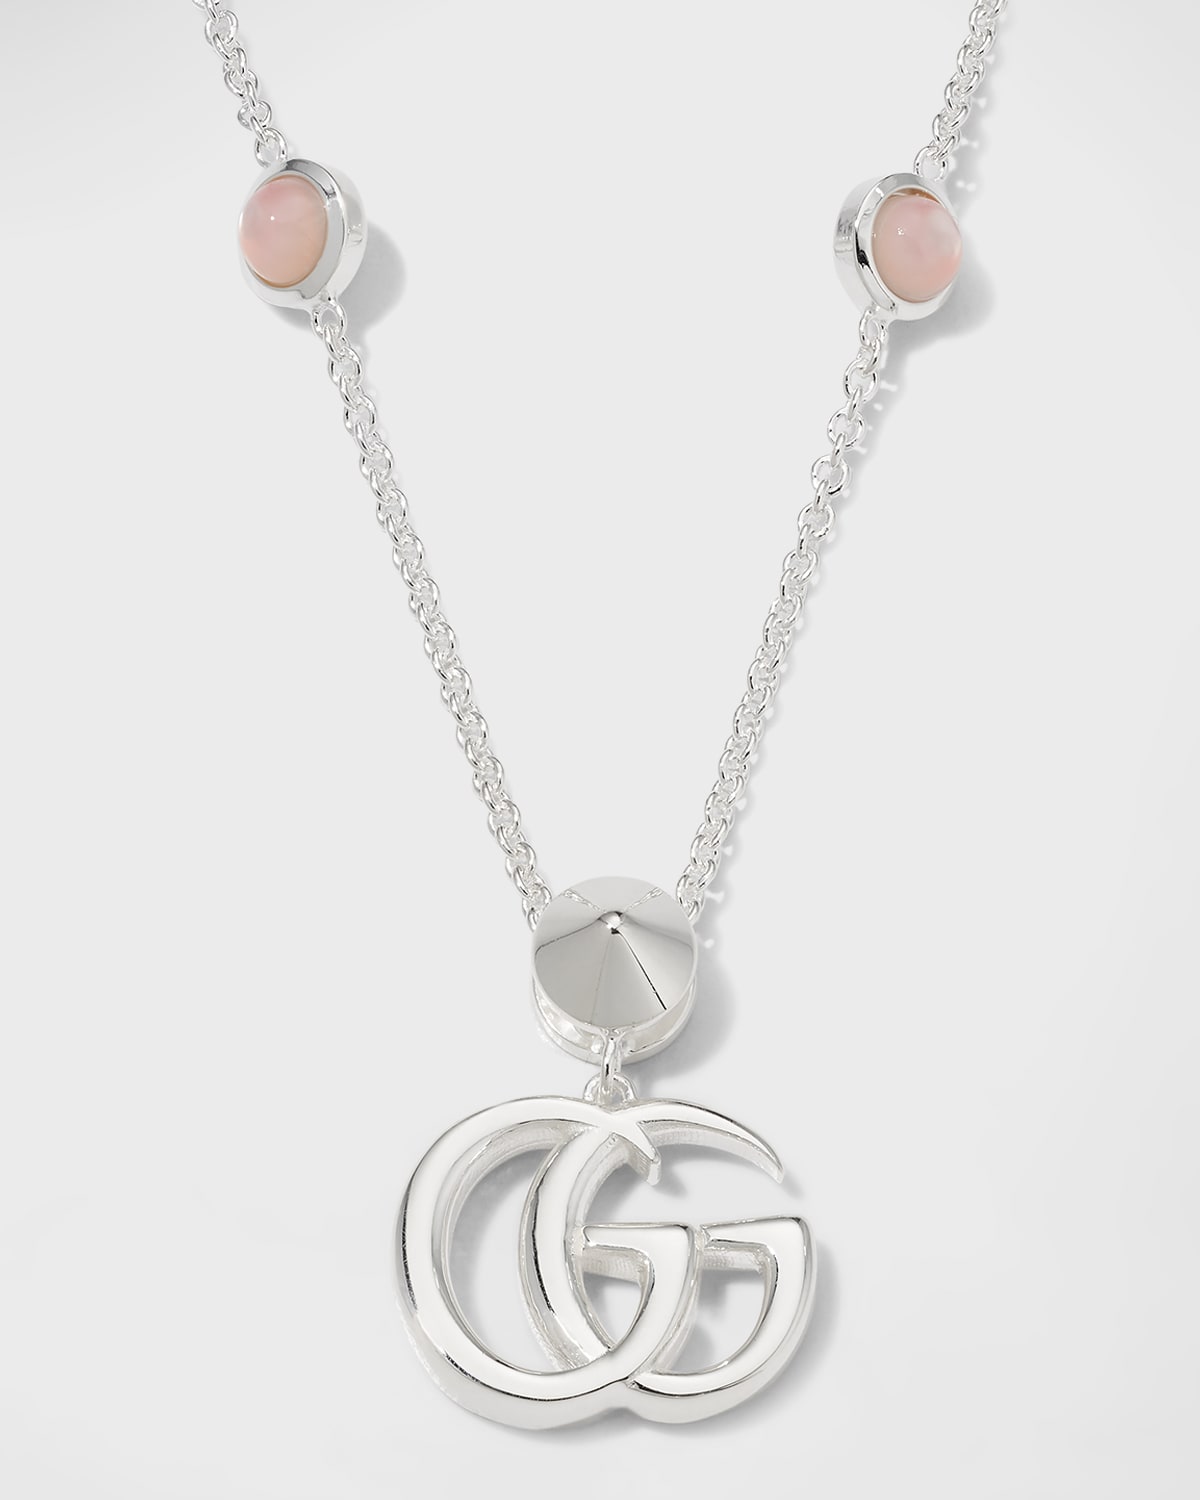 Gucci Gg Marmont Sterling Silver & Resin Necklace